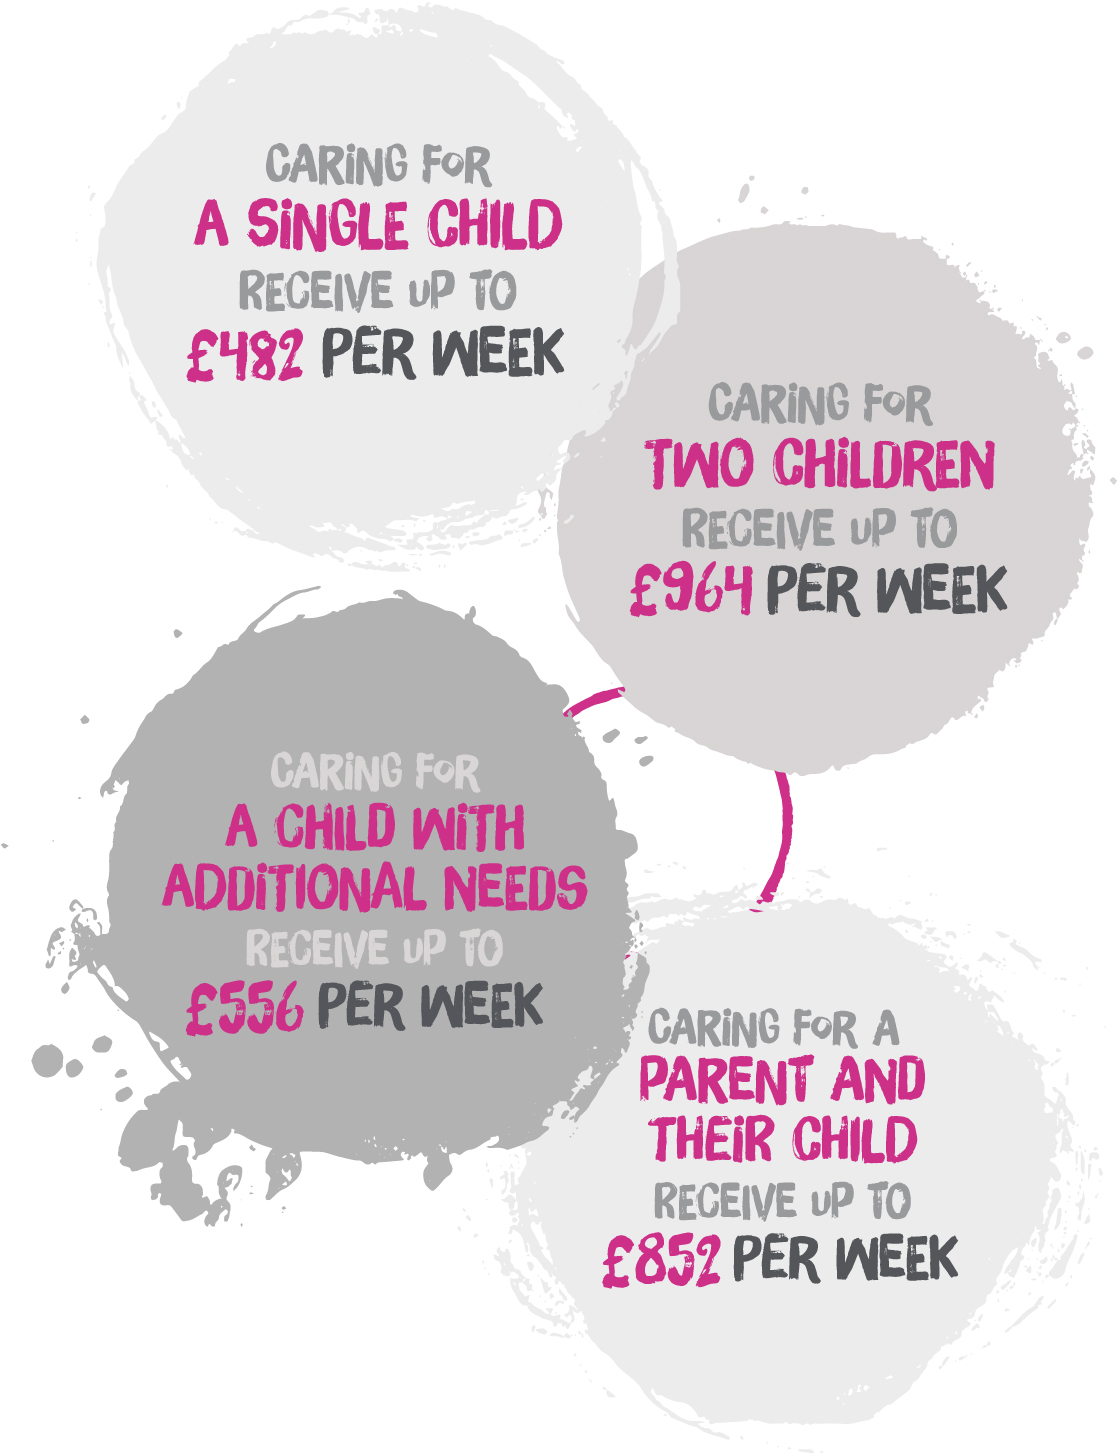 These are our fees if you're thinking of fostering in Peterborough